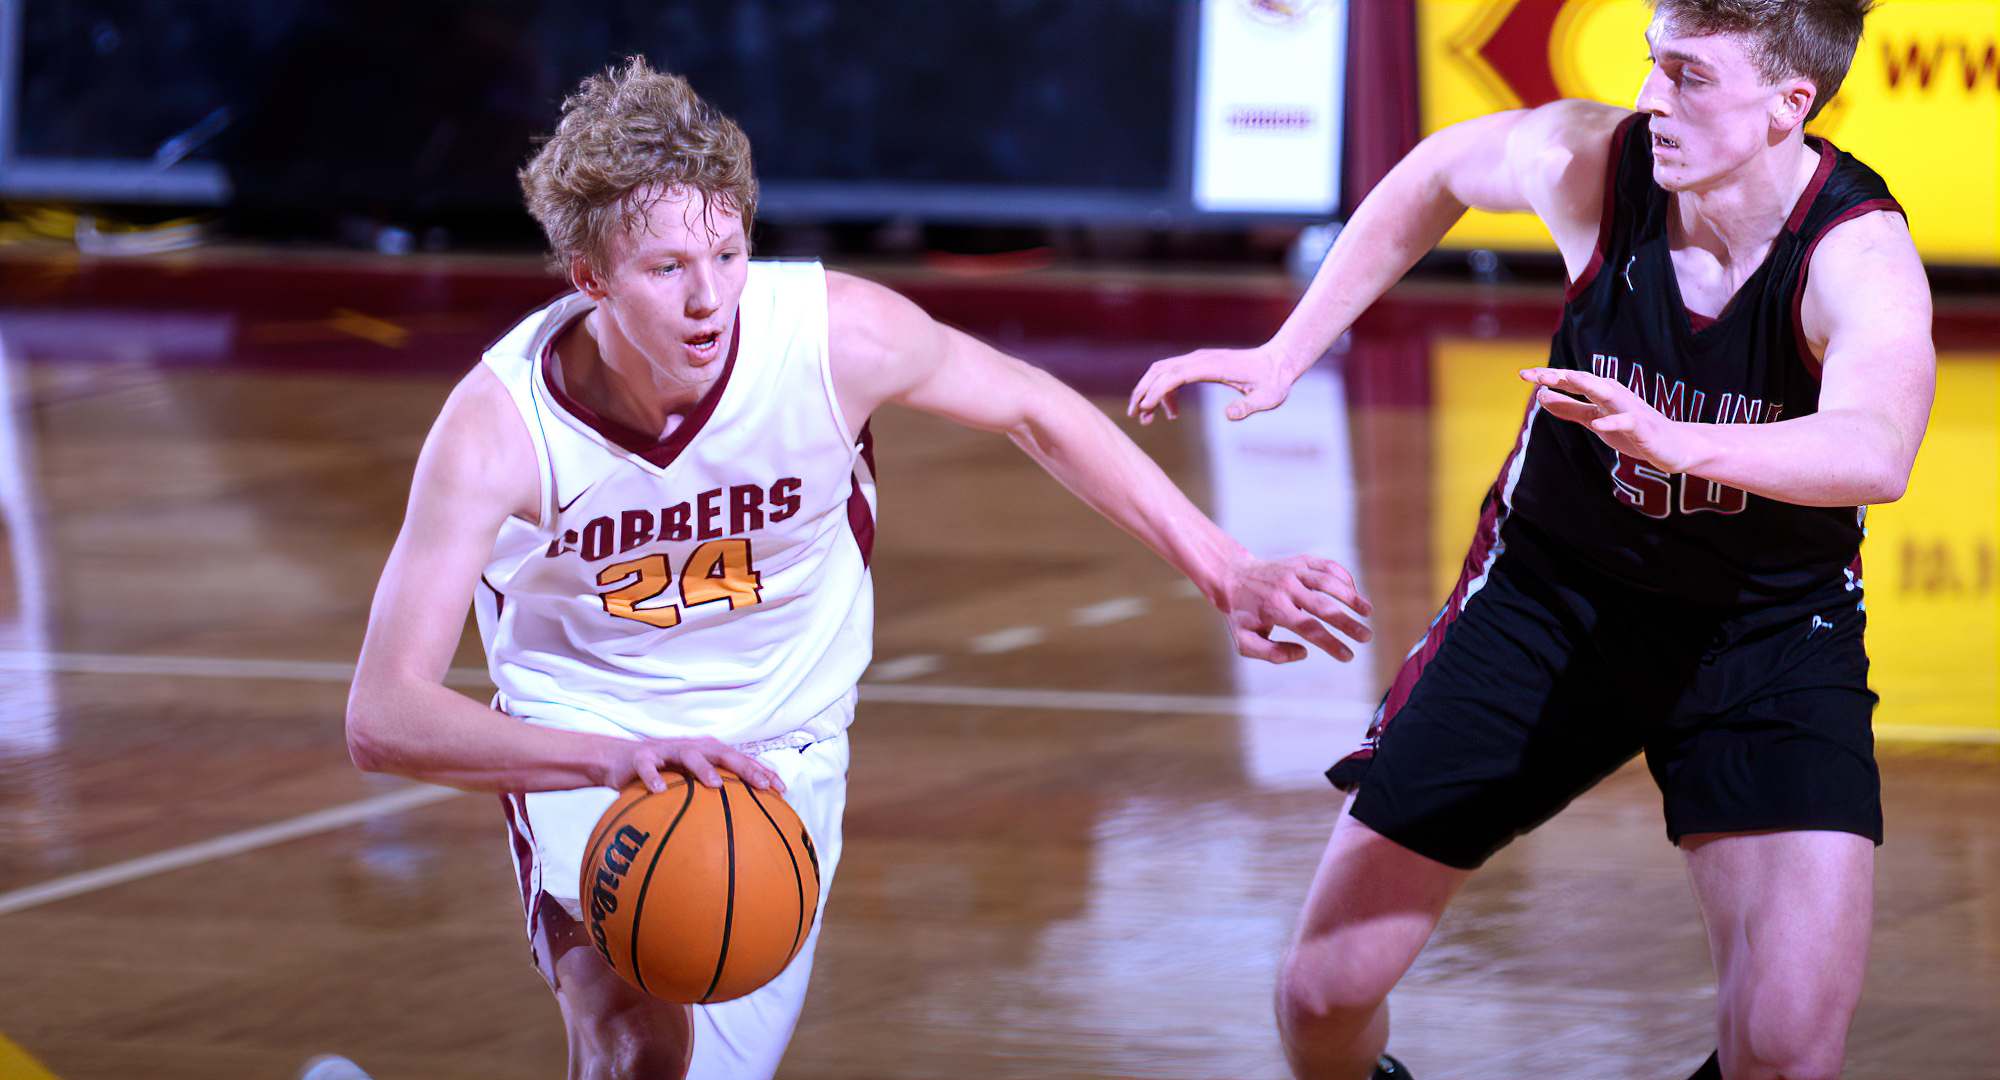 Freshman Dylan Inniger dribbles past a Hamline defender in the Cobbers' game against the Pipers. He finished with 14 points.